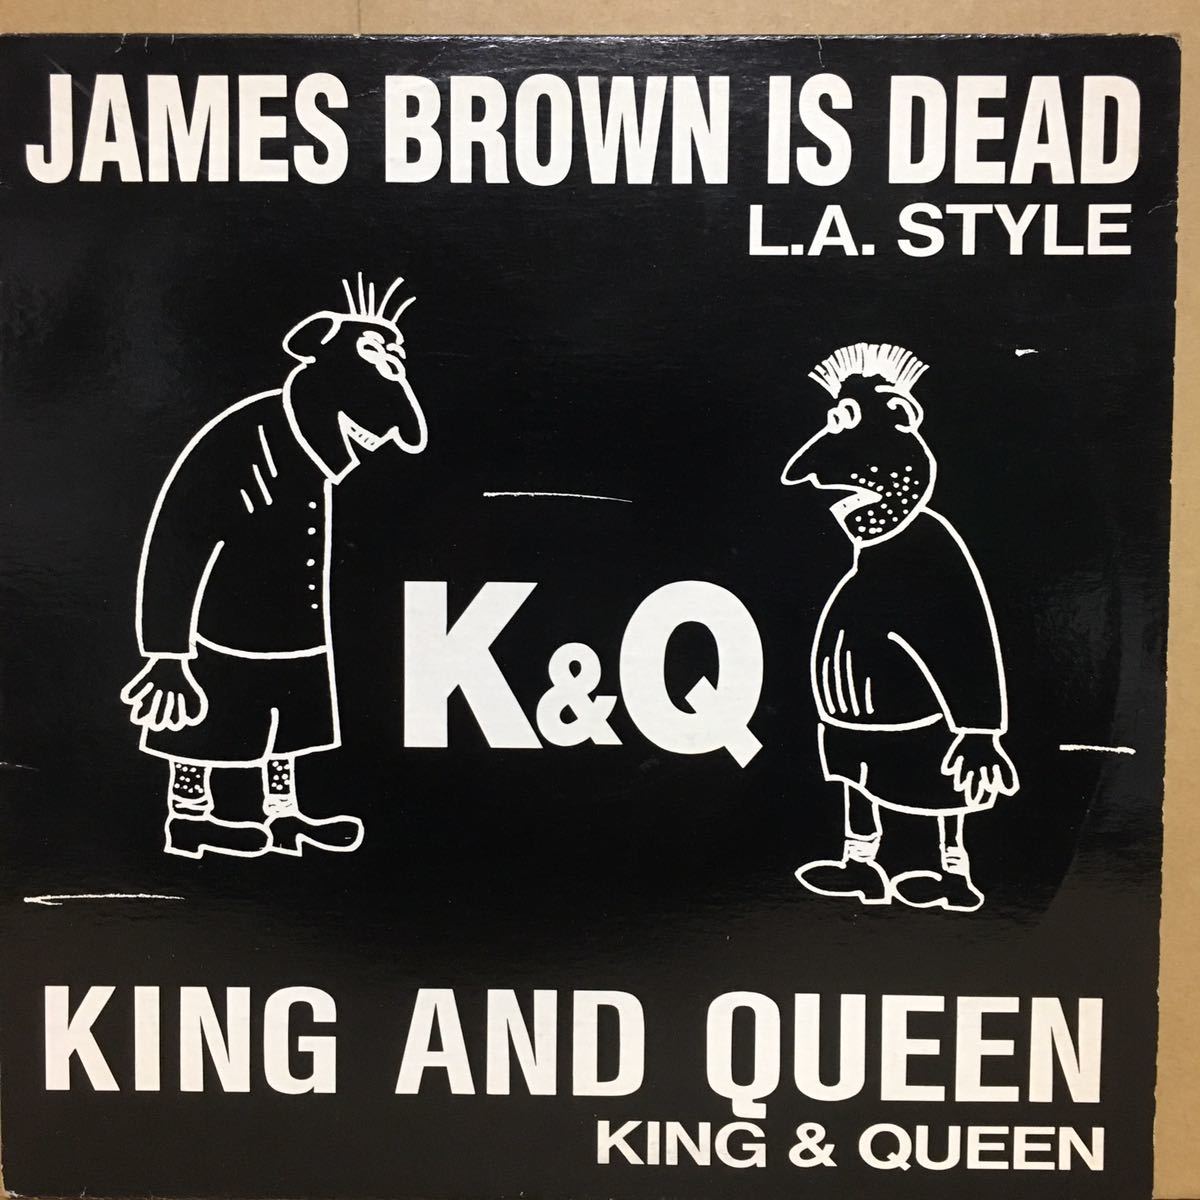 12'　KING & QUEEN / KING AND QUEEN ※ Special Queen Mix　,　L.A. STYLE / JAMES BROWN IS DEAD ※ Long Rock Radio Mix